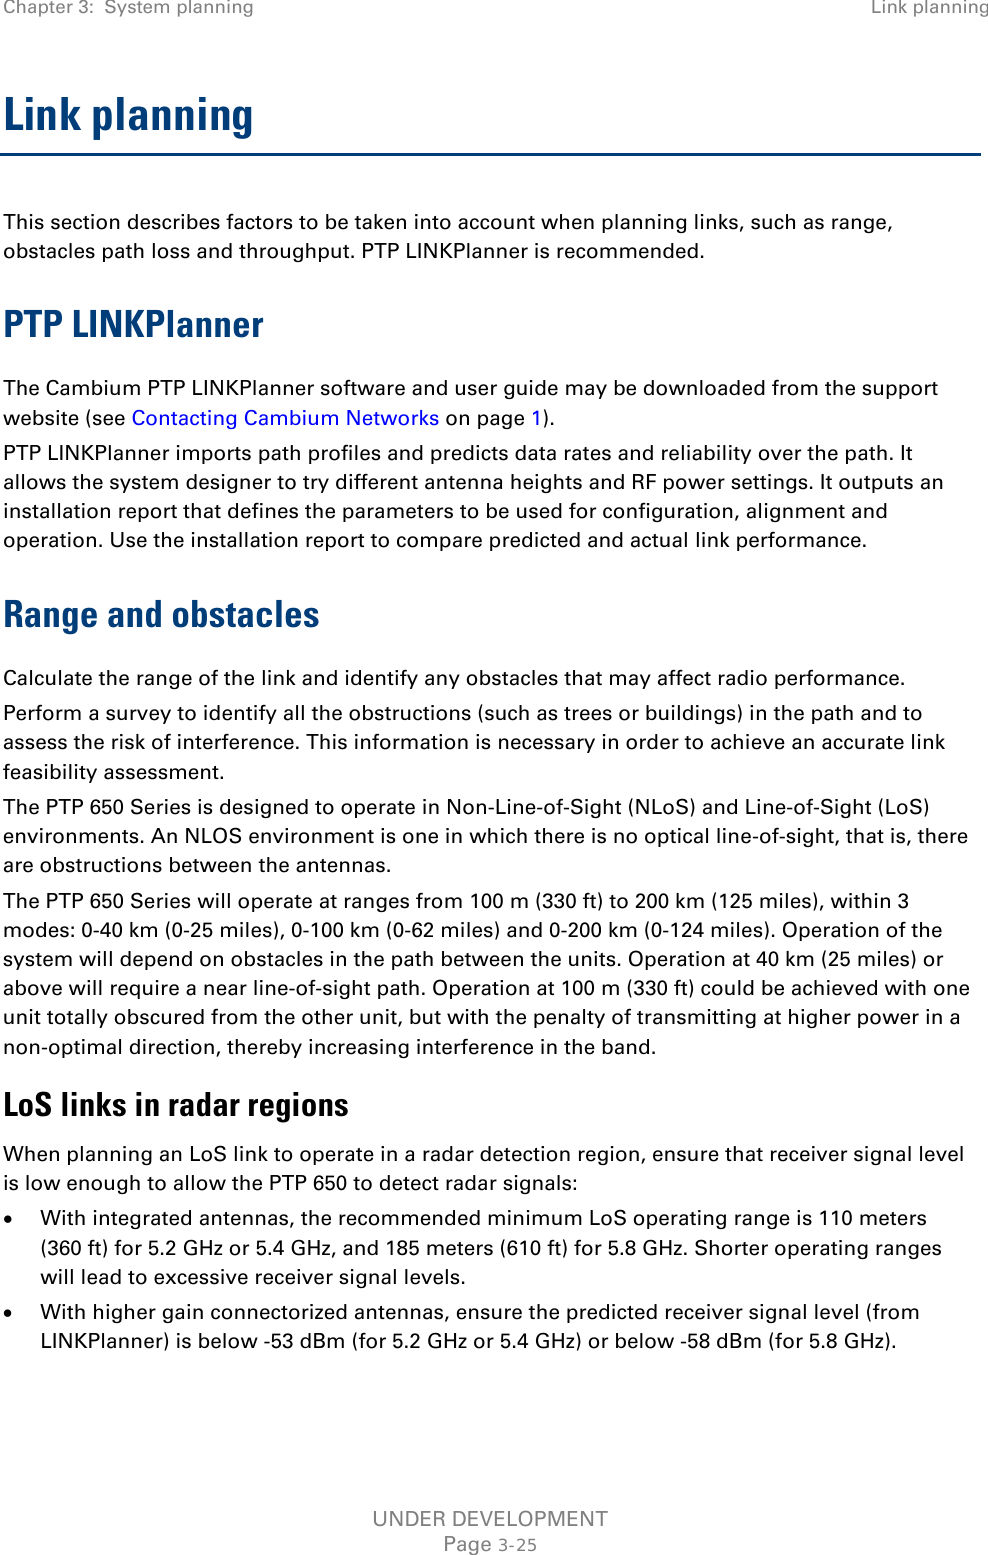 Chapter 3:  System planning Link planning  Link planning This section describes factors to be taken into account when planning links, such as range, obstacles path loss and throughput. PTP LINKPlanner is recommended. PTP LINKPlanner The Cambium PTP LINKPlanner software and user guide may be downloaded from the support website (see Contacting Cambium Networks on page 1). PTP LINKPlanner imports path profiles and predicts data rates and reliability over the path. It allows the system designer to try different antenna heights and RF power settings. It outputs an installation report that defines the parameters to be used for configuration, alignment and operation. Use the installation report to compare predicted and actual link performance. Range and obstacles Calculate the range of the link and identify any obstacles that may affect radio performance. Perform a survey to identify all the obstructions (such as trees or buildings) in the path and to assess the risk of interference. This information is necessary in order to achieve an accurate link feasibility assessment. The PTP 650 Series is designed to operate in Non-Line-of-Sight (NLoS) and Line-of-Sight (LoS) environments. An NLOS environment is one in which there is no optical line-of-sight, that is, there are obstructions between the antennas. The PTP 650 Series will operate at ranges from 100 m (330 ft) to 200 km (125 miles), within 3 modes: 0-40 km (0-25 miles), 0-100 km (0-62 miles) and 0-200 km (0-124 miles). Operation of the system will depend on obstacles in the path between the units. Operation at 40 km (25 miles) or above will require a near line-of-sight path. Operation at 100 m (330 ft) could be achieved with one unit totally obscured from the other unit, but with the penalty of transmitting at higher power in a non-optimal direction, thereby increasing interference in the band. LoS links in radar regions When planning an LoS link to operate in a radar detection region, ensure that receiver signal level is low enough to allow the PTP 650 to detect radar signals: • With integrated antennas, the recommended minimum LoS operating range is 110 meters (360 ft) for 5.2 GHz or 5.4 GHz, and 185 meters (610 ft) for 5.8 GHz. Shorter operating ranges will lead to excessive receiver signal levels. • With higher gain connectorized antennas, ensure the predicted receiver signal level (from LINKPlanner) is below -53 dBm (for 5.2 GHz or 5.4 GHz) or below -58 dBm (for 5.8 GHz). UNDER DEVELOPMENT Page 3-25 